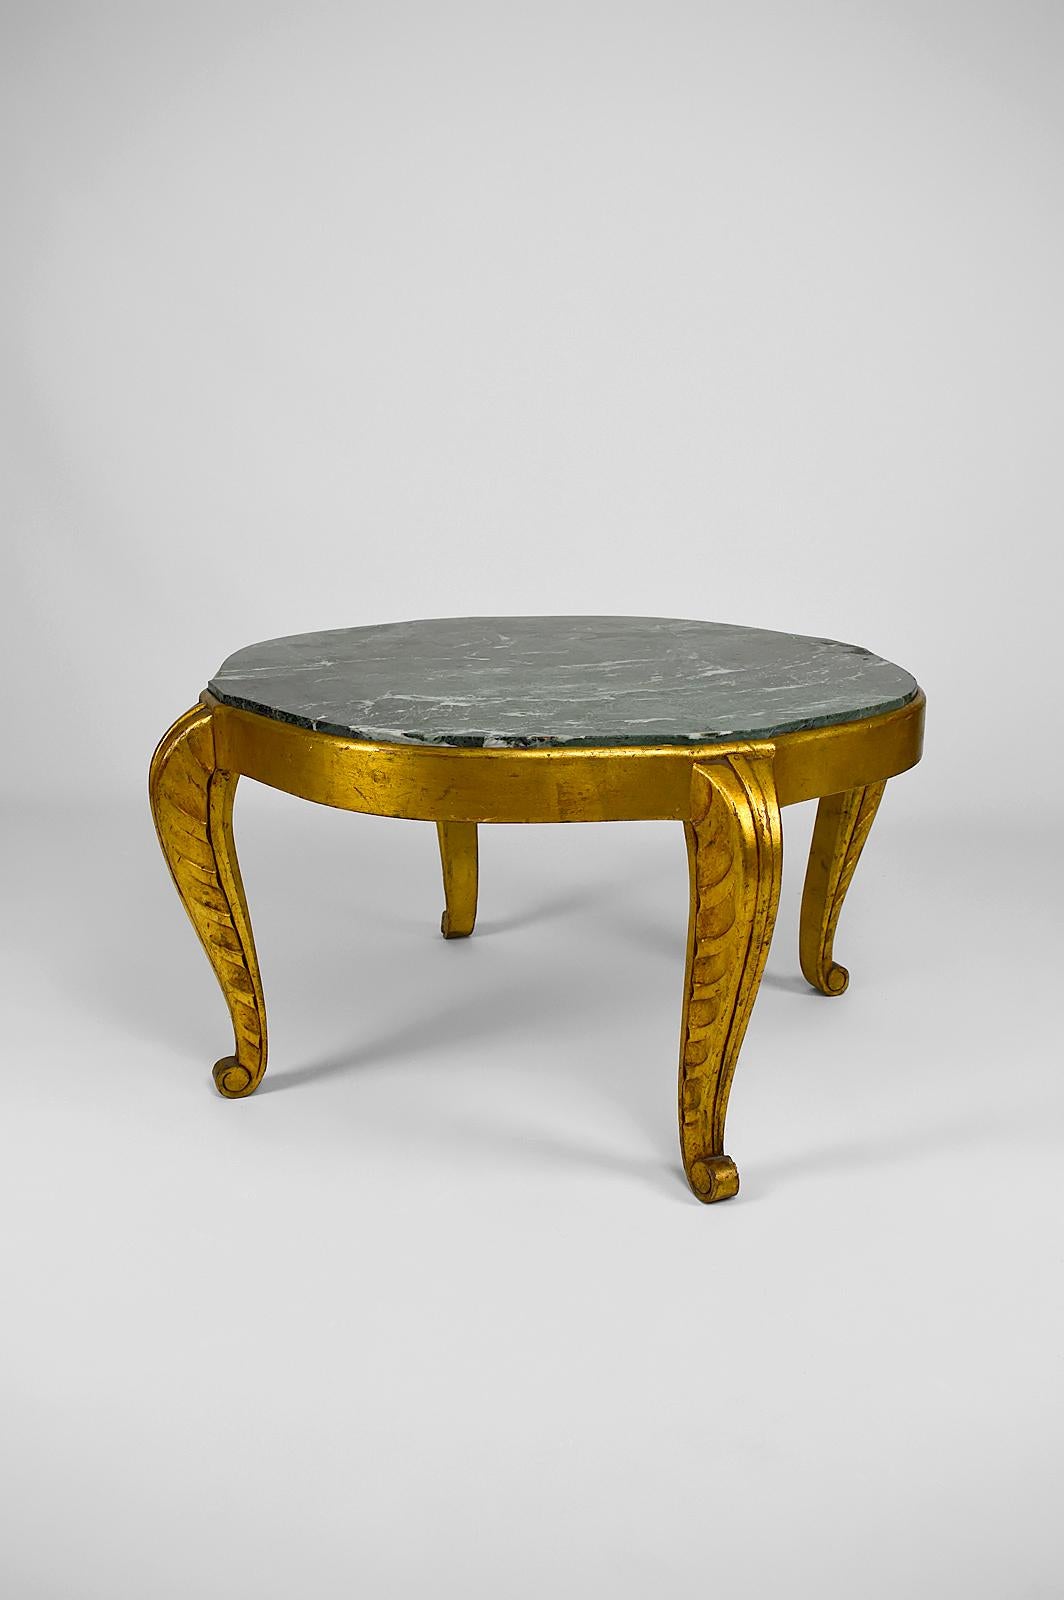 Very elegant gueridon / coffee / side table composed of an octagonal top in green marble and a gilded wooden structure whose feet are carved with palm motifs.

In very good condition
Art Deco / Neo-Classical, France, 1940s / 1950s.
By Maison